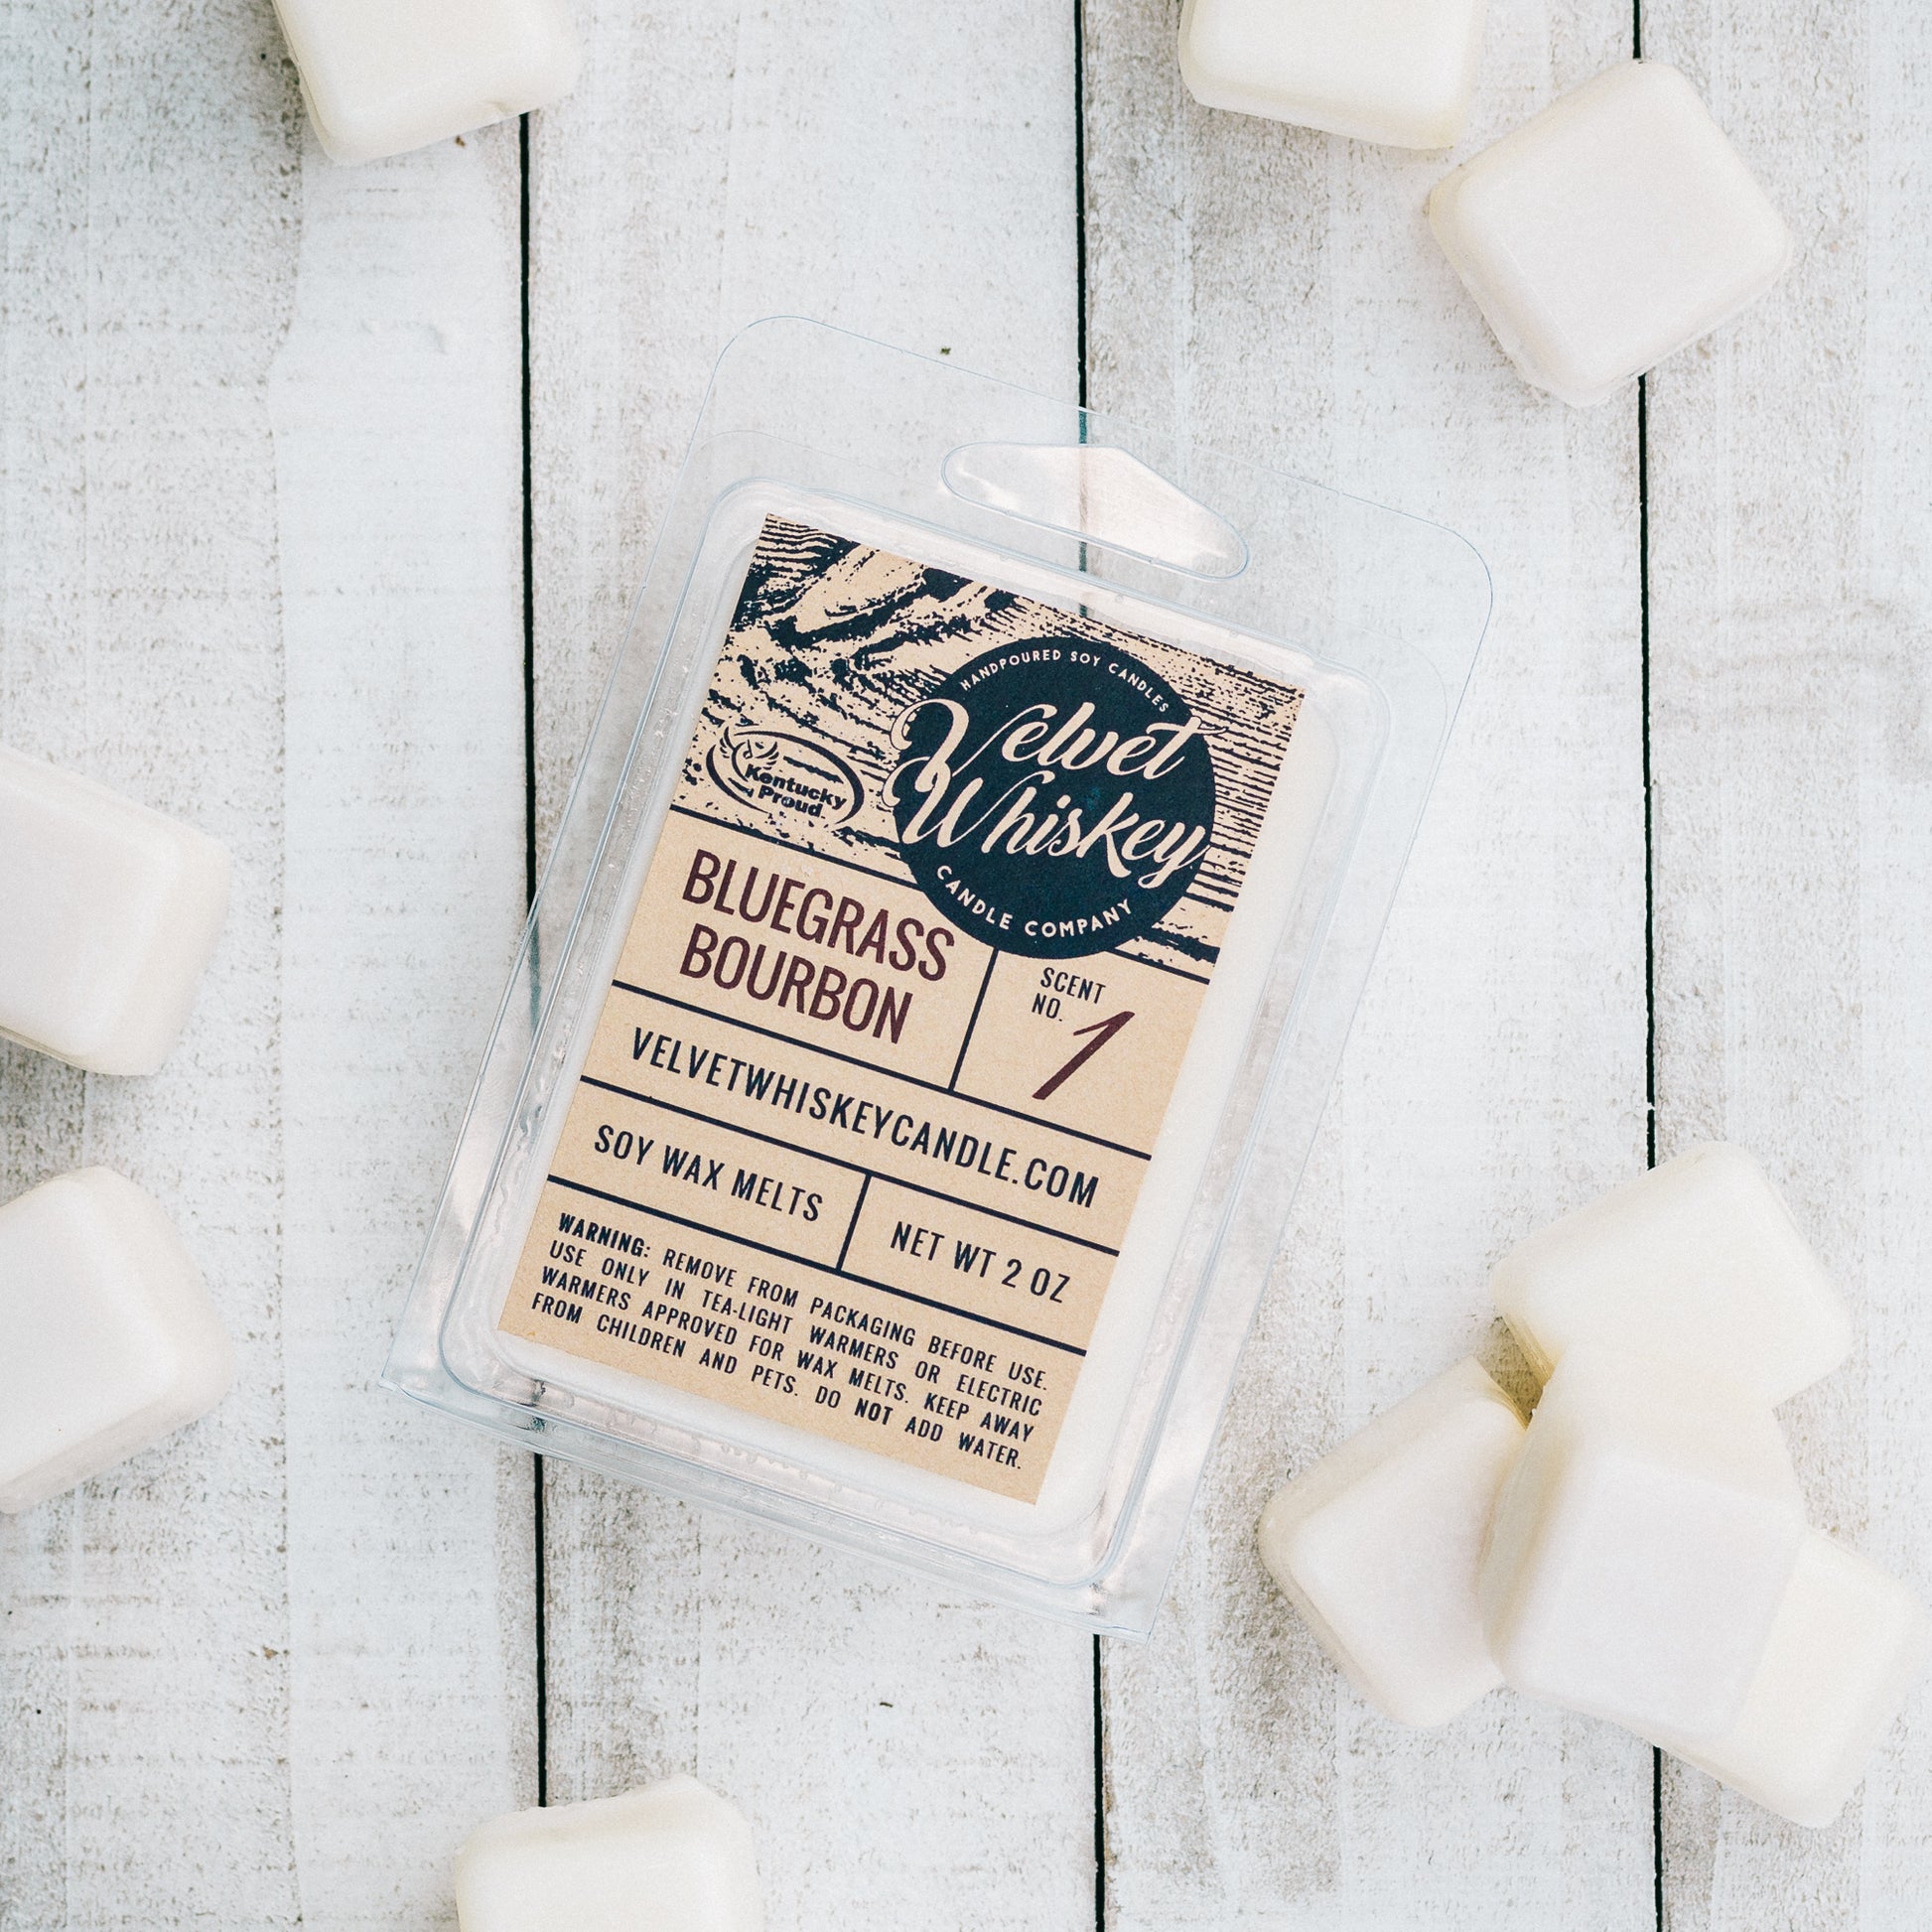 Ok you huys new sample packs are coming now! Check them out #tiltoksho, Wax Melts